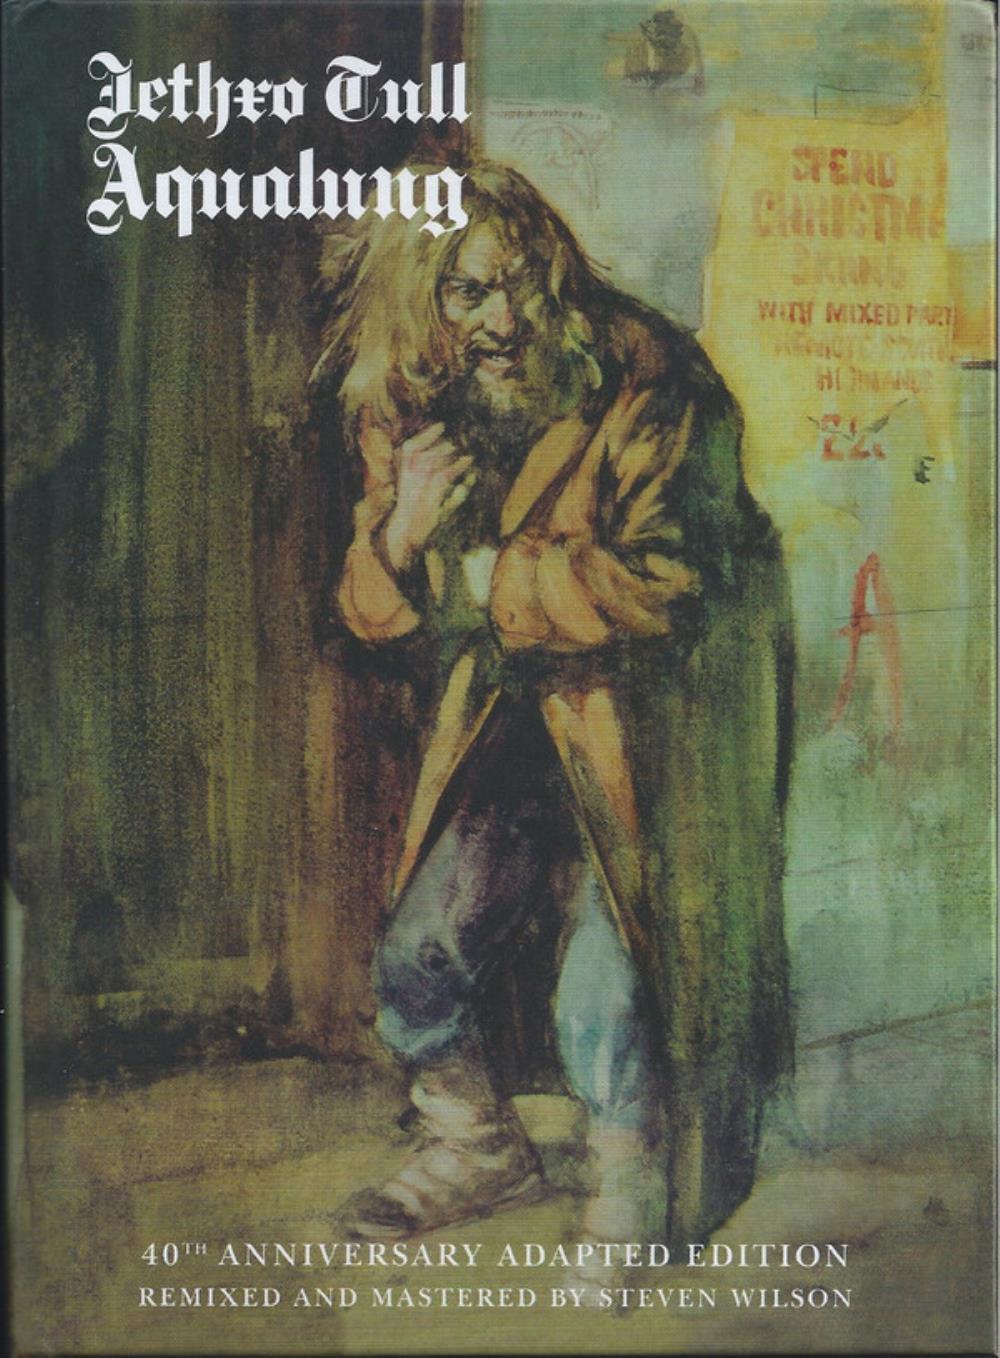 Jethro Tull Aqualung - 40th Anniversary Adapted Edition album cover